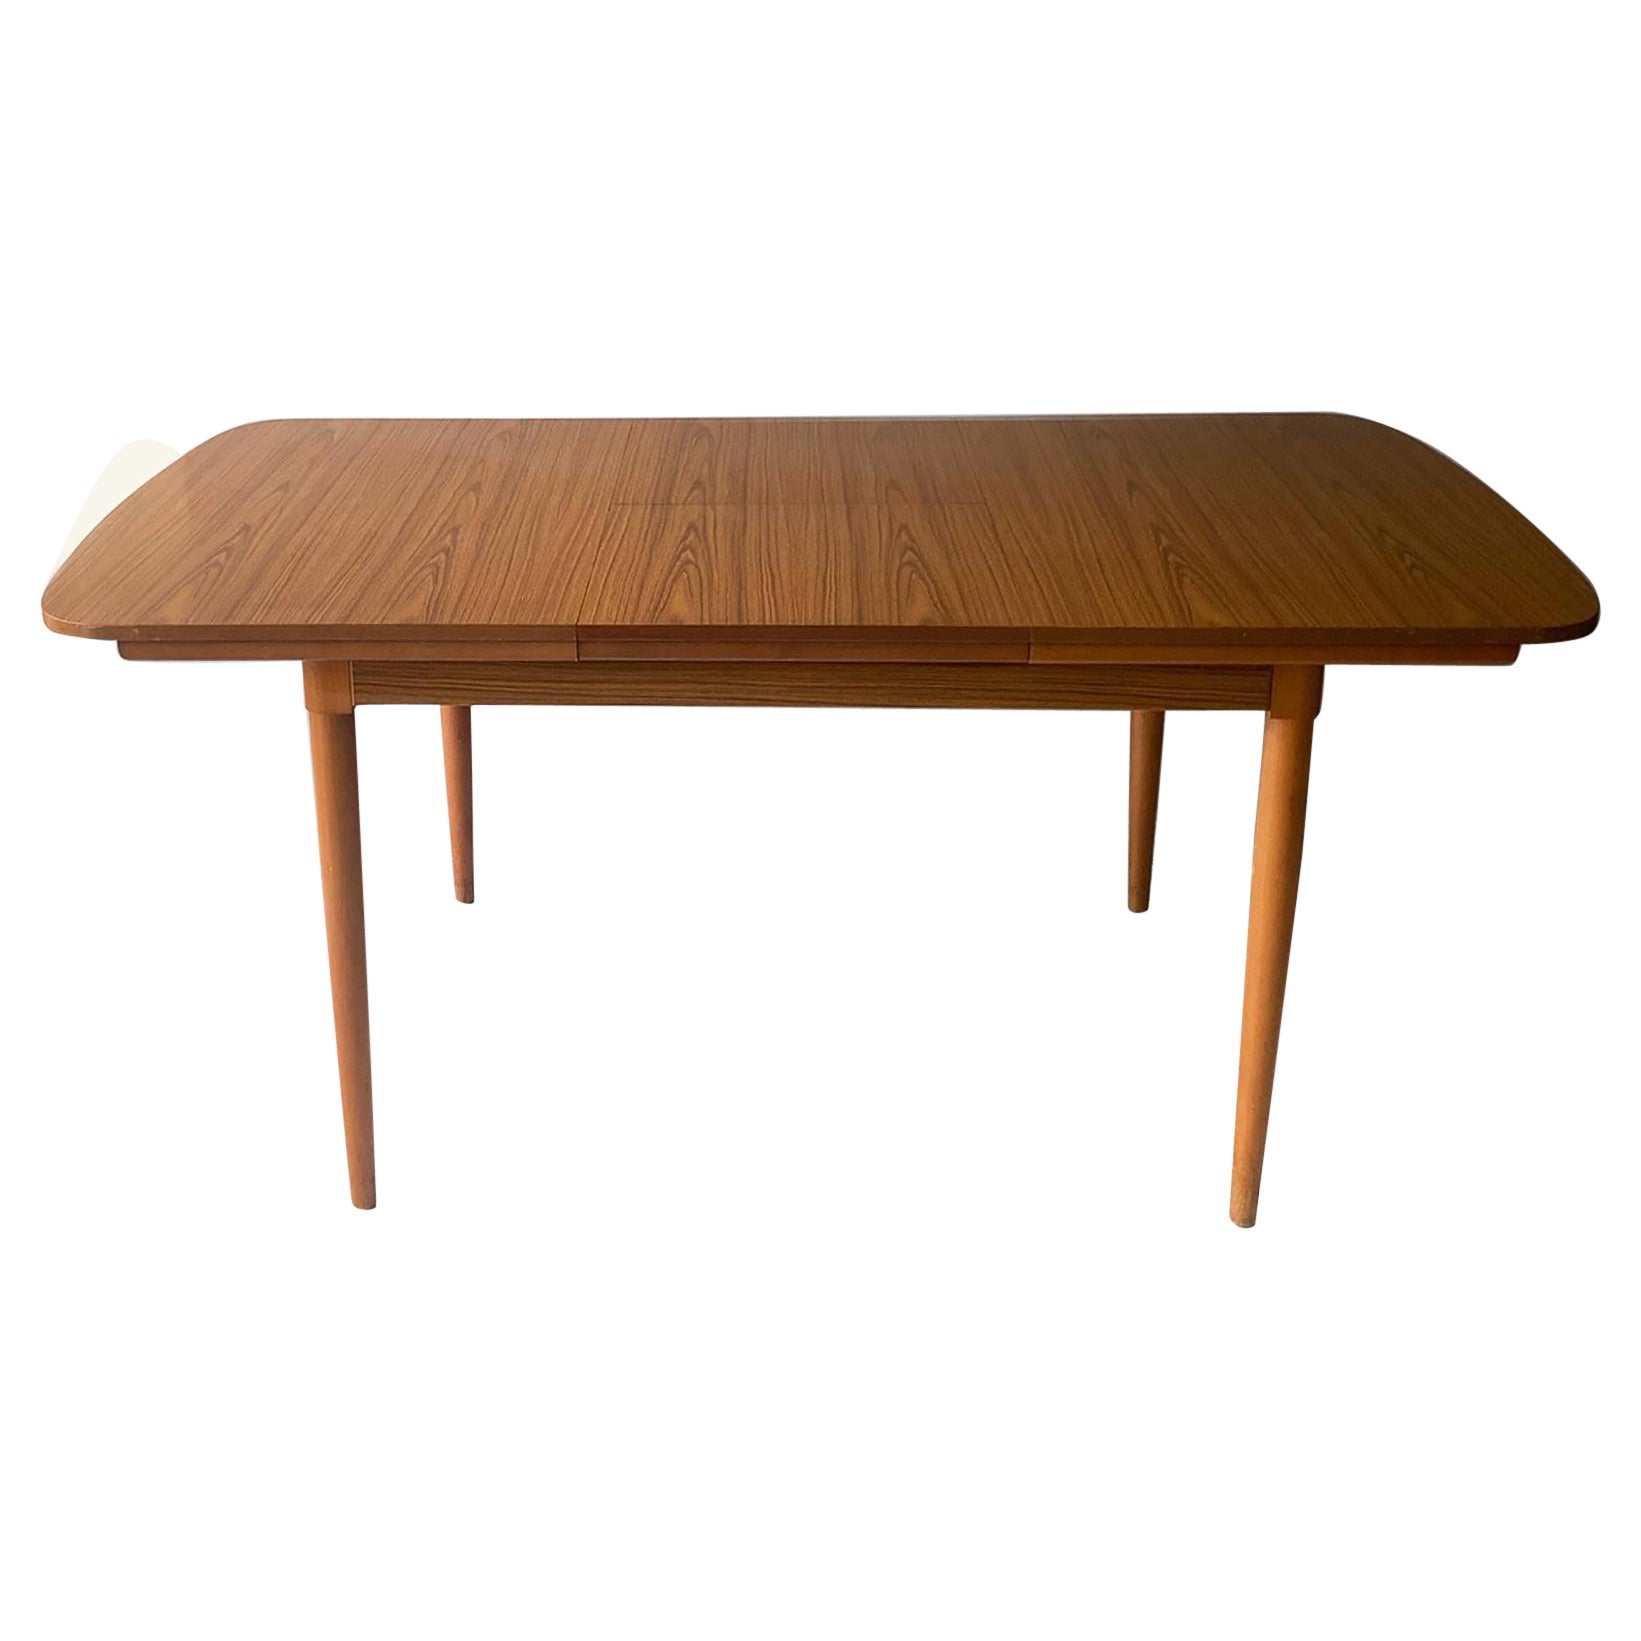 1970’s mid century extending dining table by Schreiber Furniture For Sale